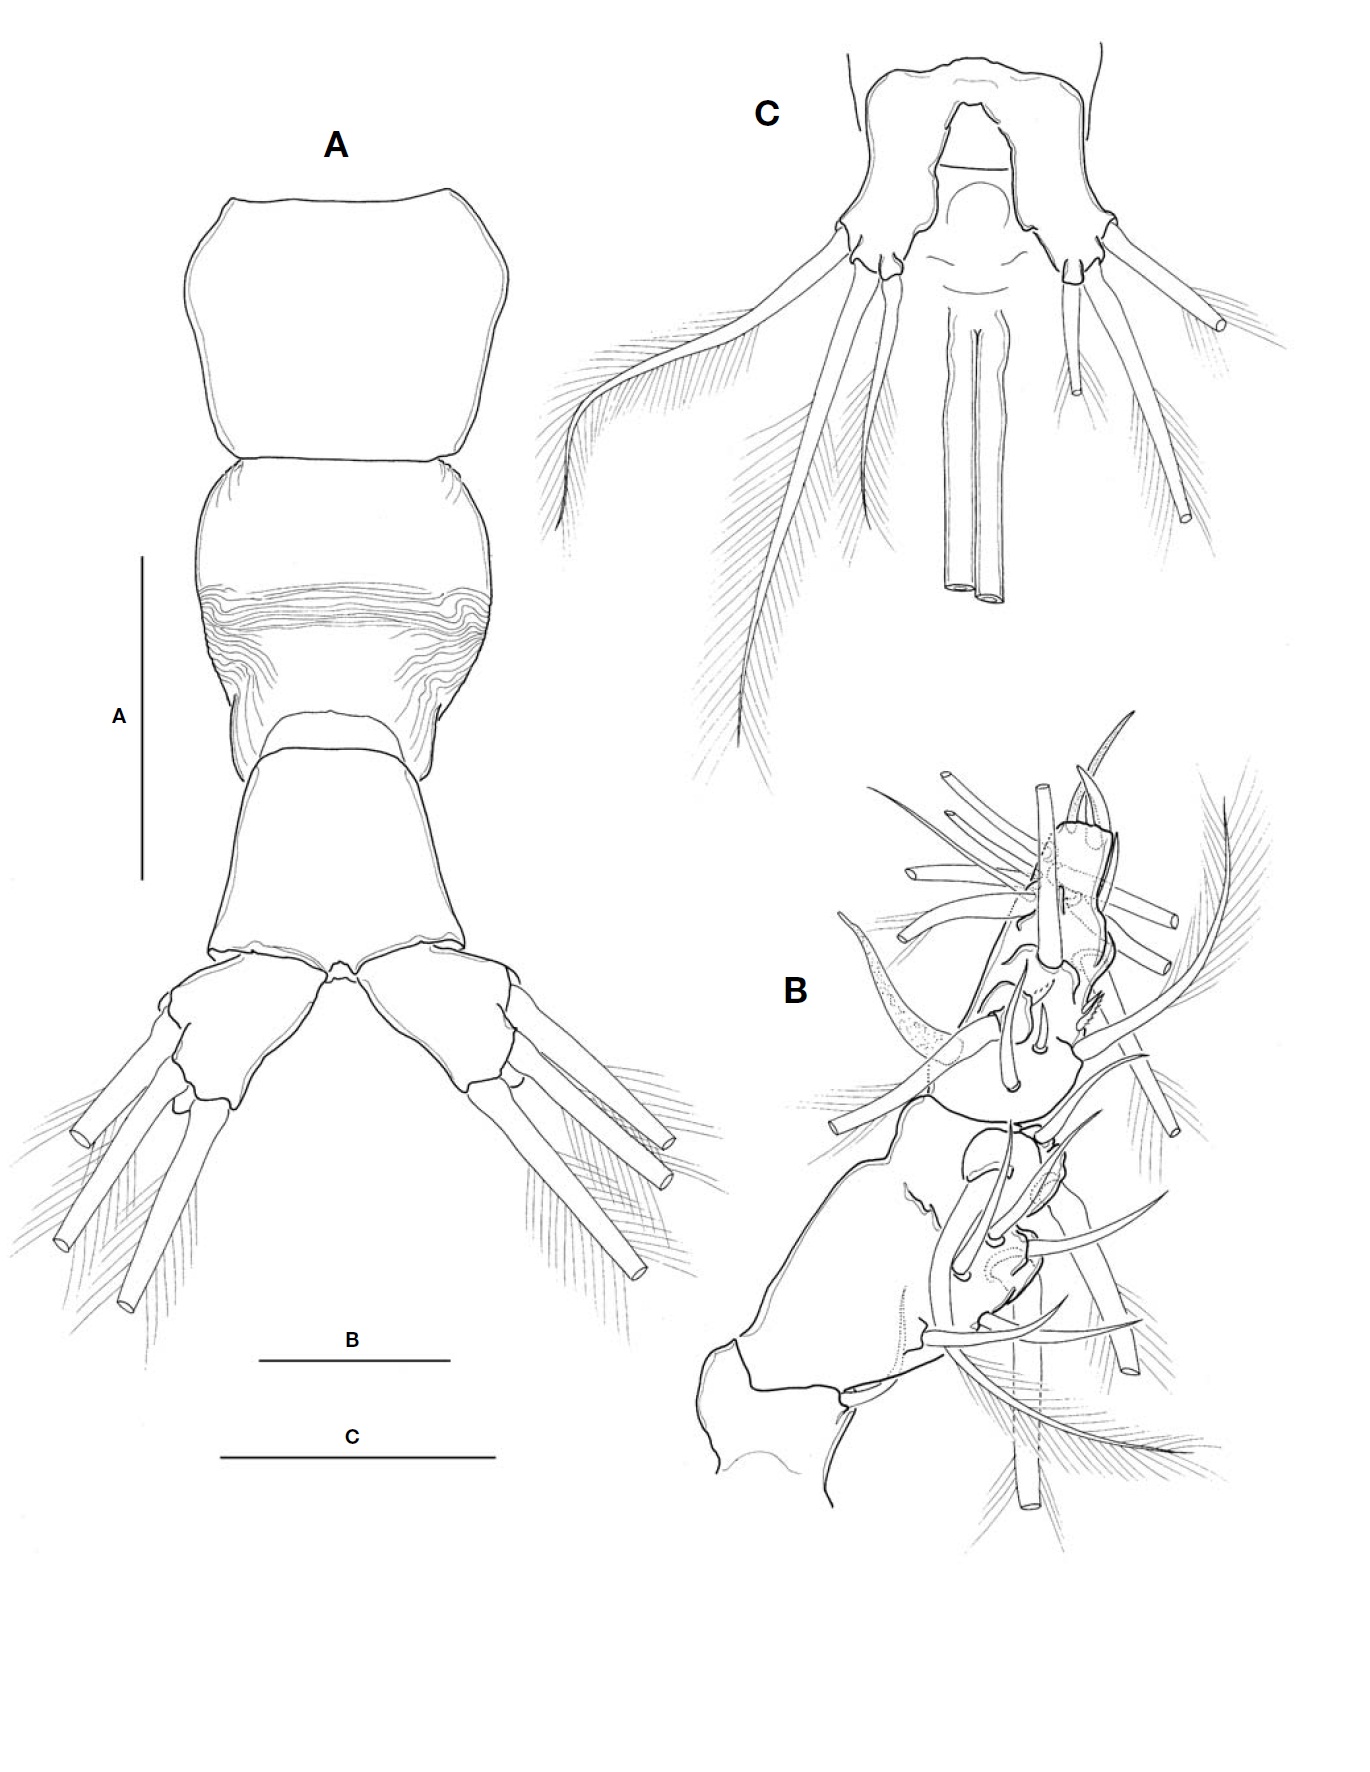 Cymbasoma striifrons n. sp. female. A Urosome dorsal; B Antennule; C Leg 5 and basal part of ovigerous spines ventral. Scale bars: A C=100 ㎛ B=50 ㎛.